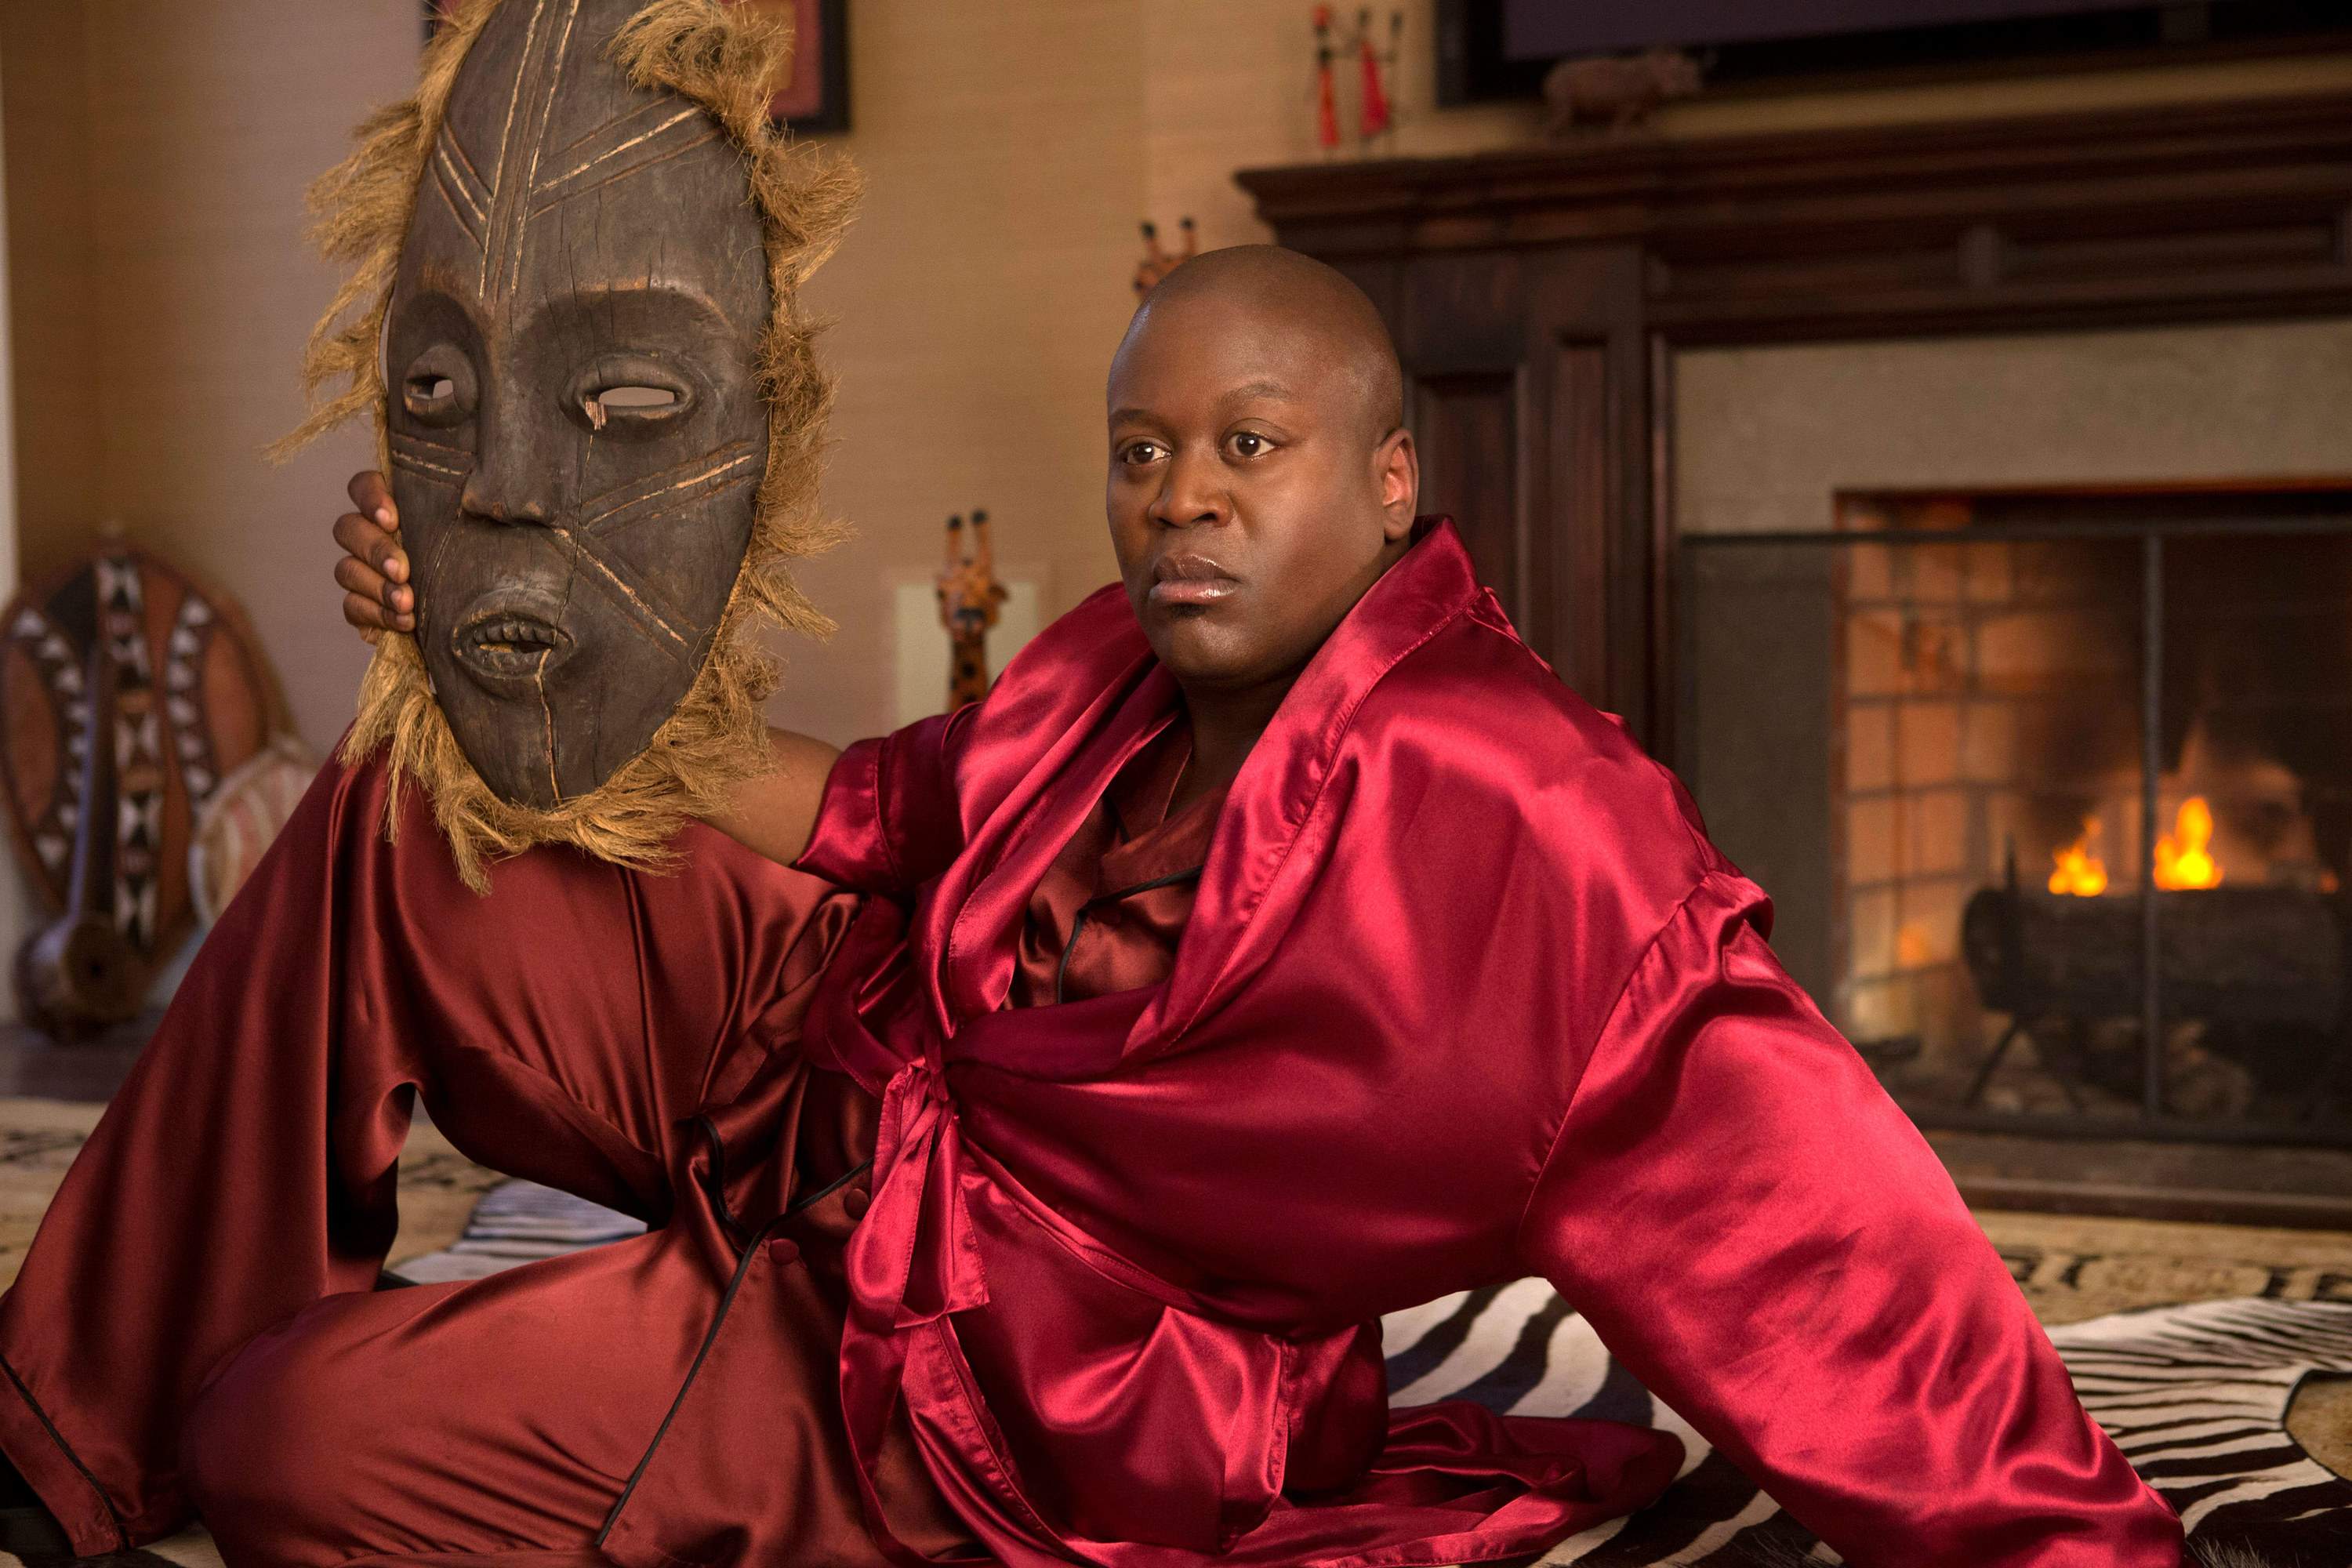 titus posing in silk pyjamas and holding a large african mask